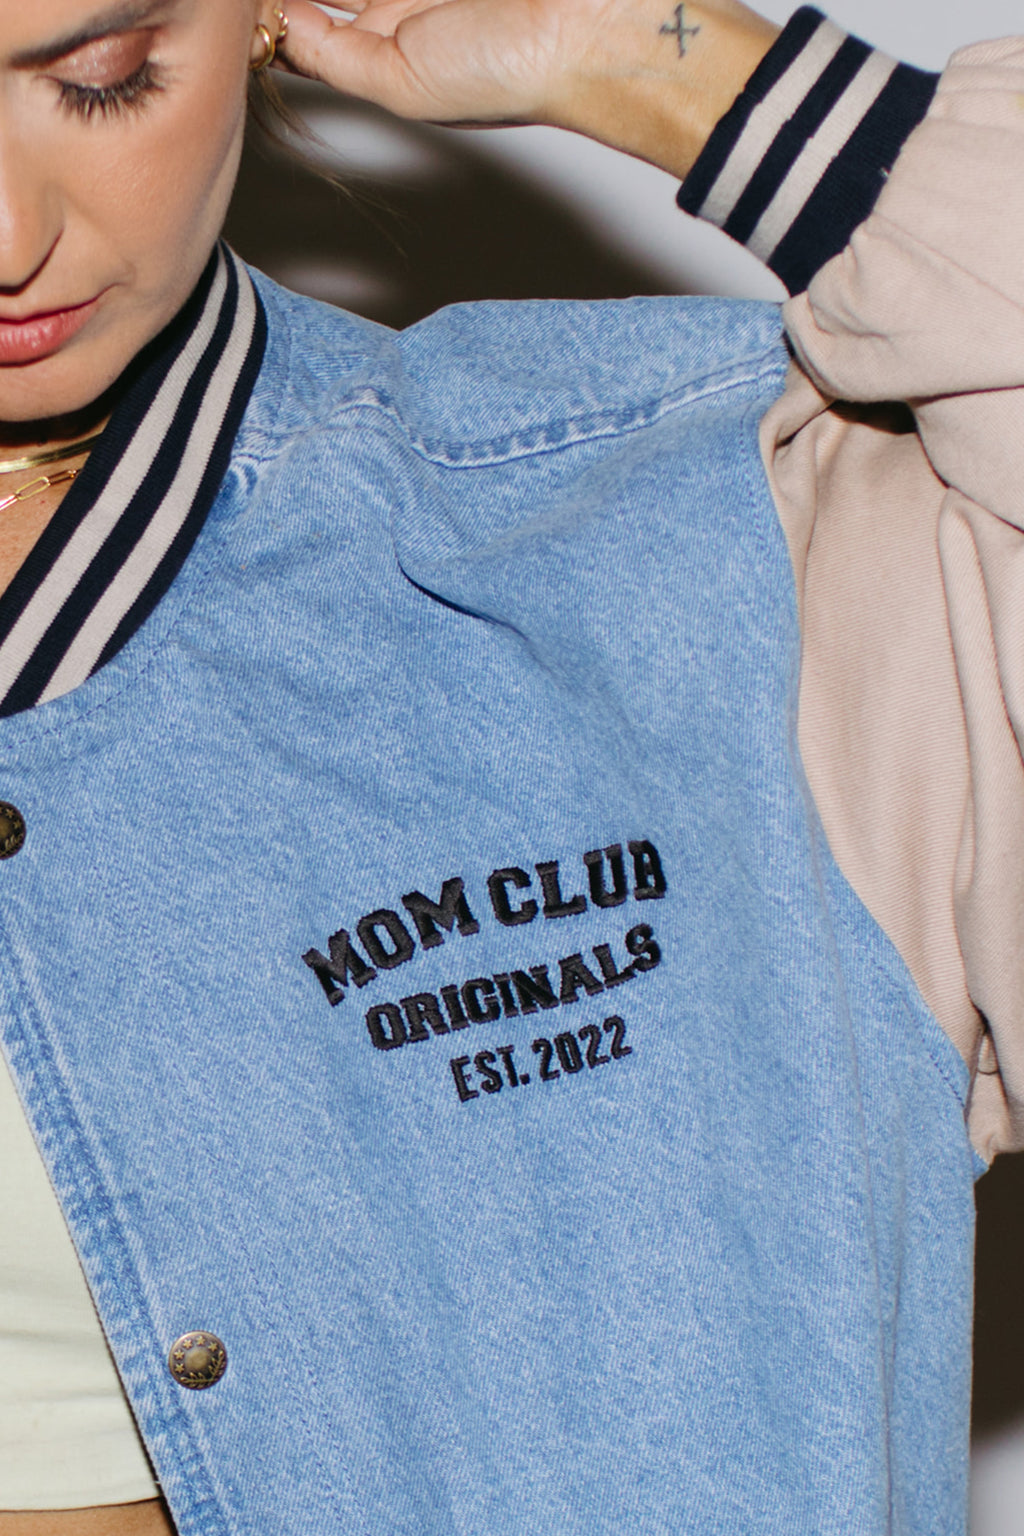 Mom Club Denim Varsity Jacket - This item is made with love so Please allow 2-3 weeks for production prior to shipment! :)